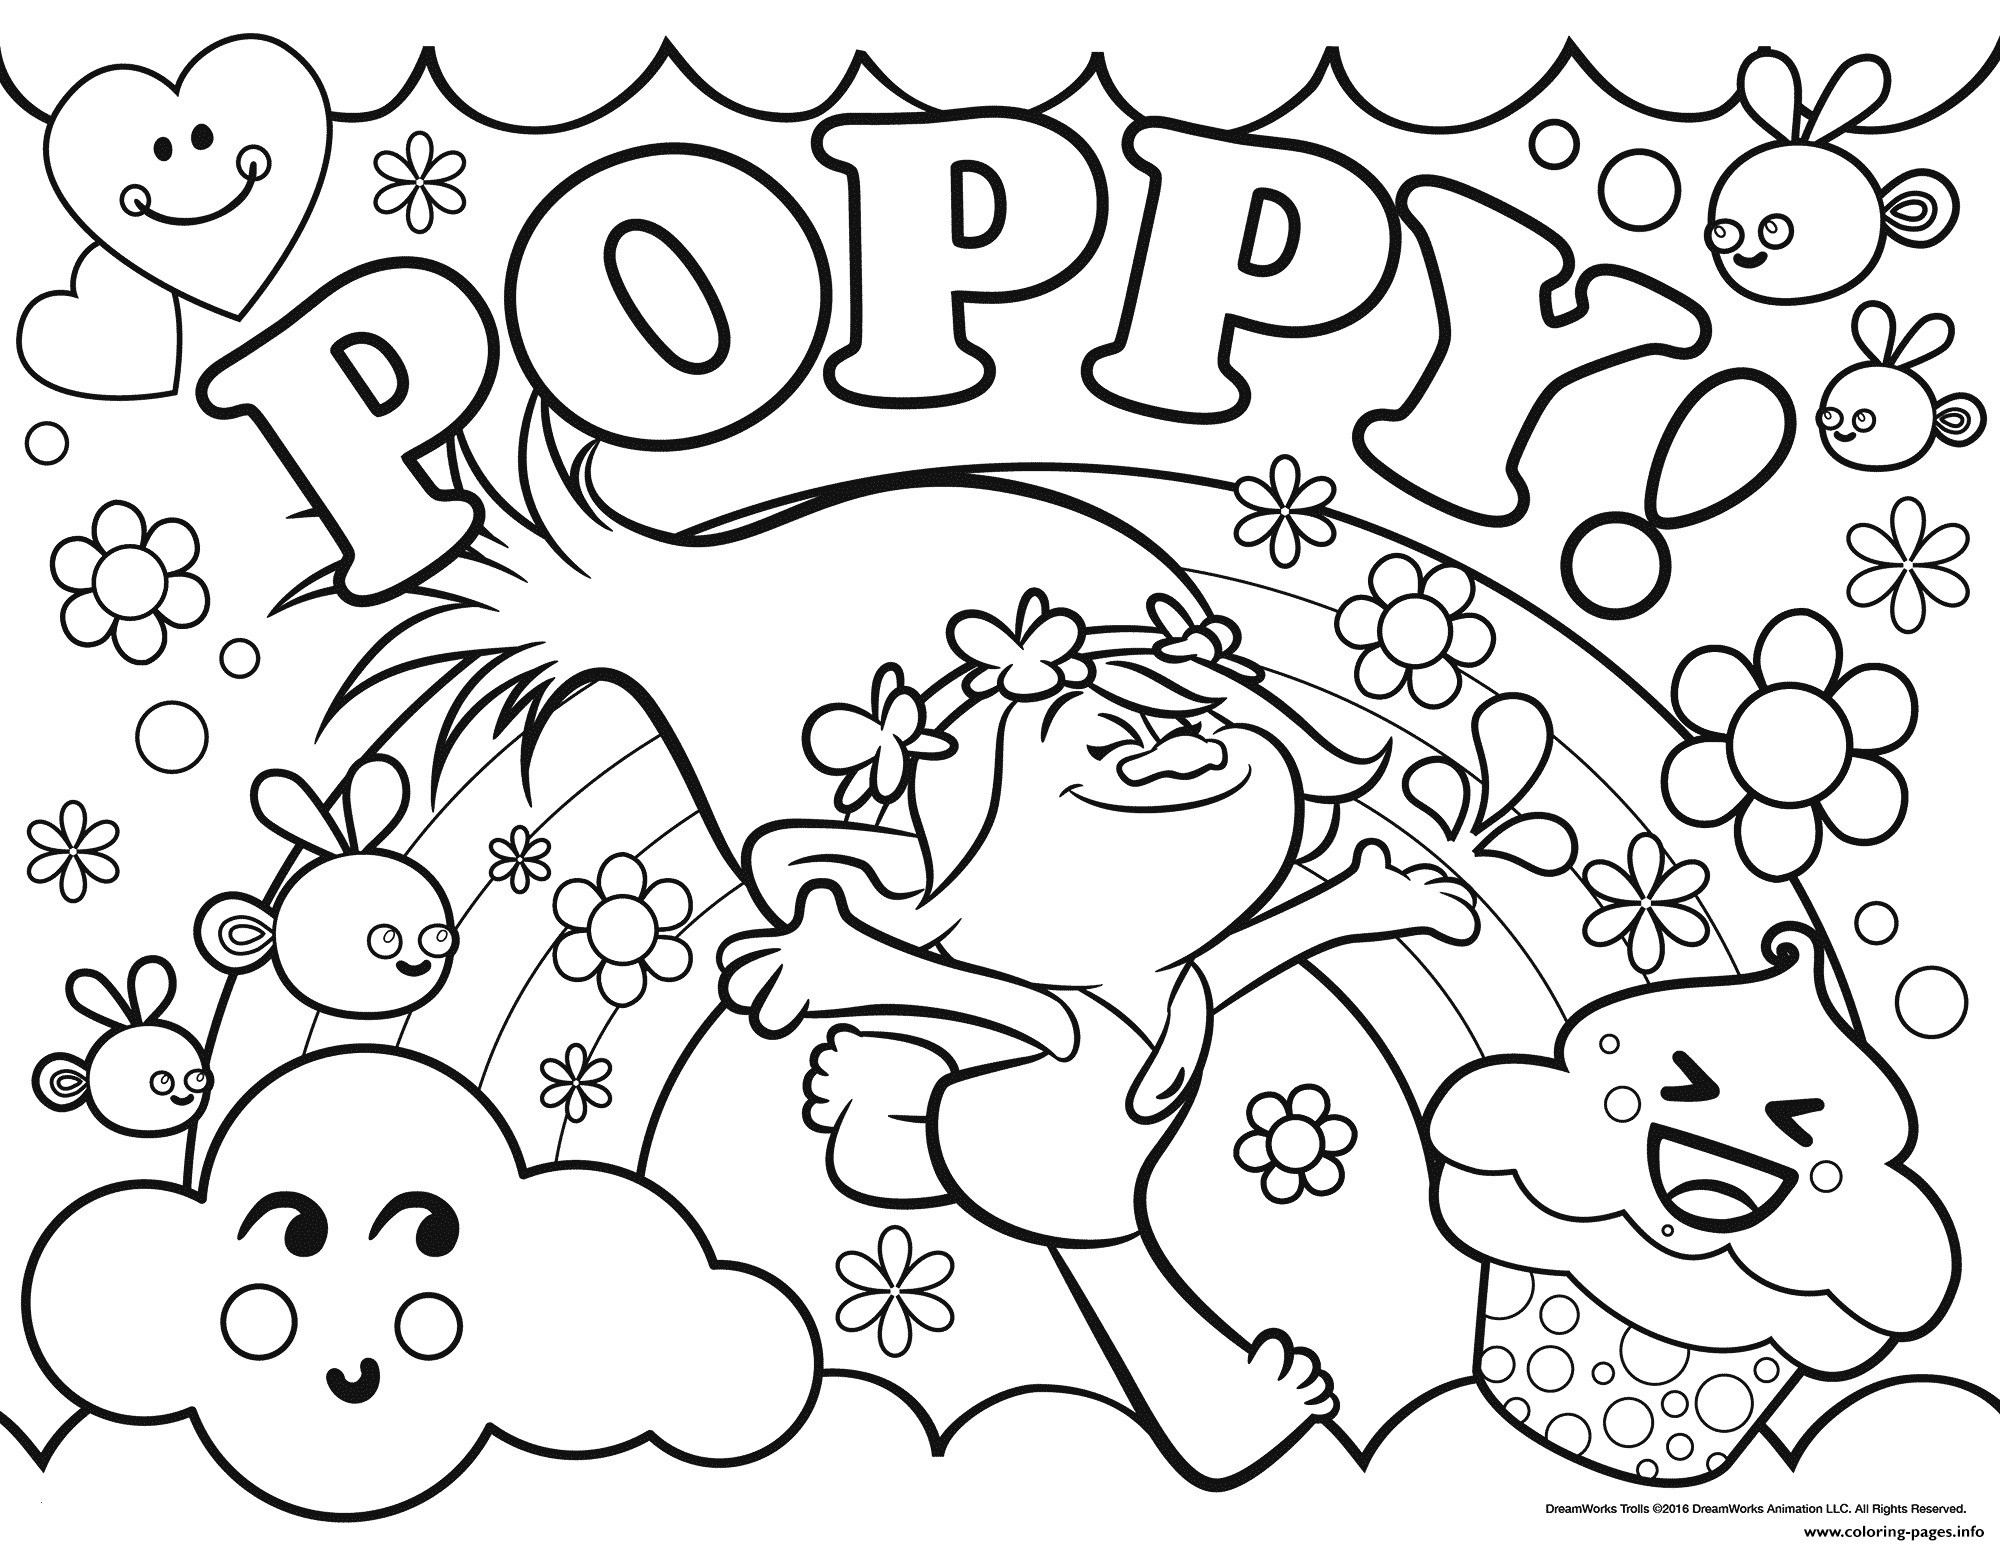 Poppy Trolls Colouring In Pages Wallpaper